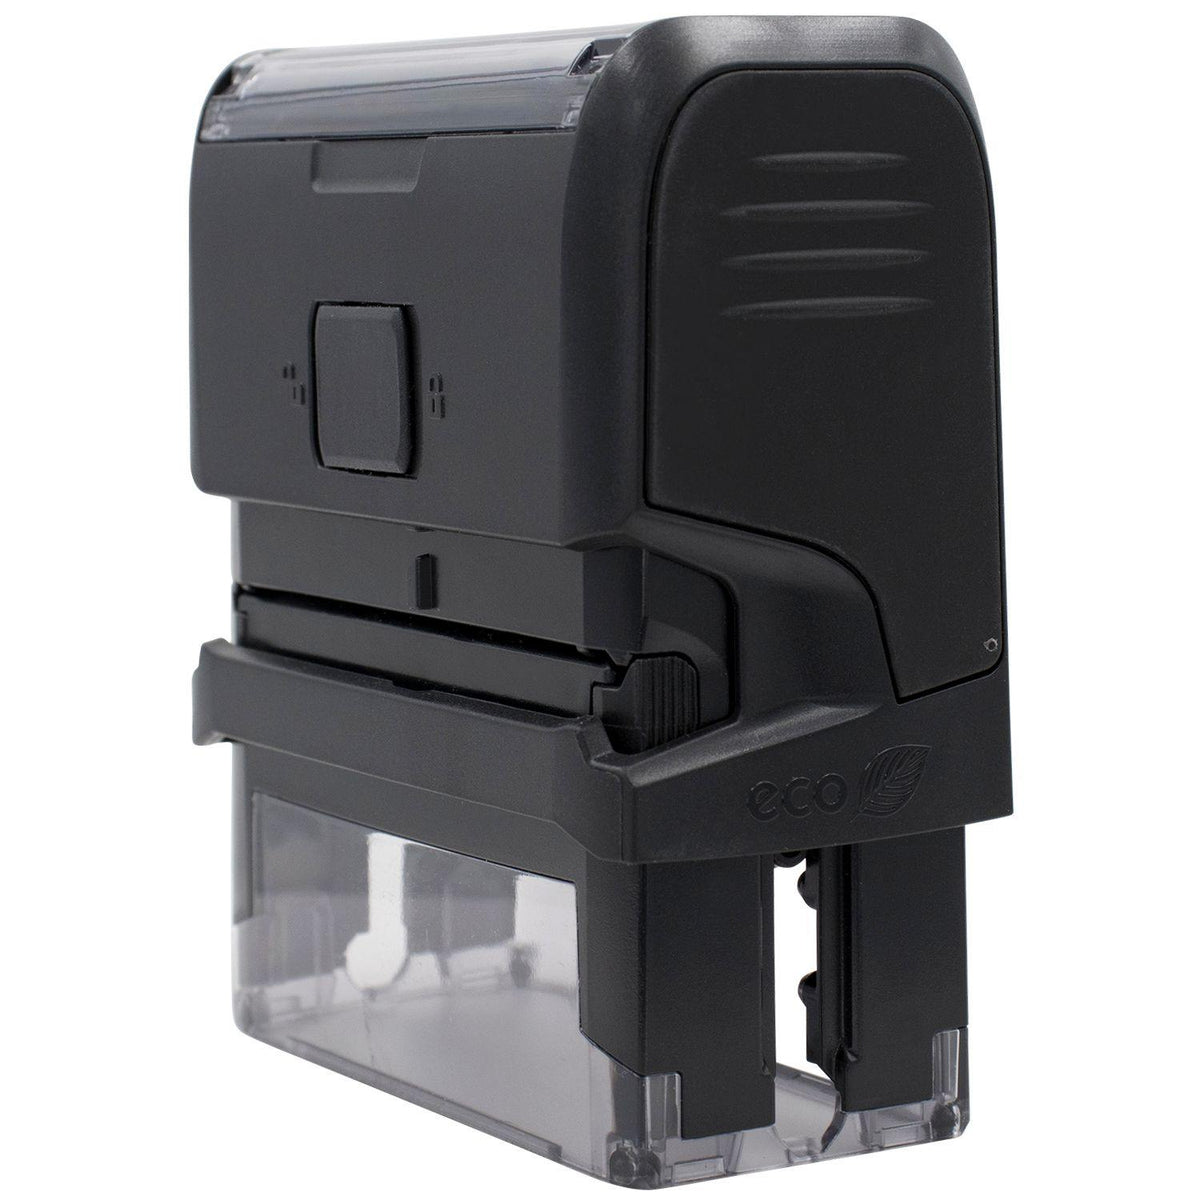 Self-Inking Contado Stamp - Engineer Seal Stamps - Brand_Trodat, Impression Size_Small, Stamp Type_Self-Inking Stamp, Type of Use_General, Type of Use_Office